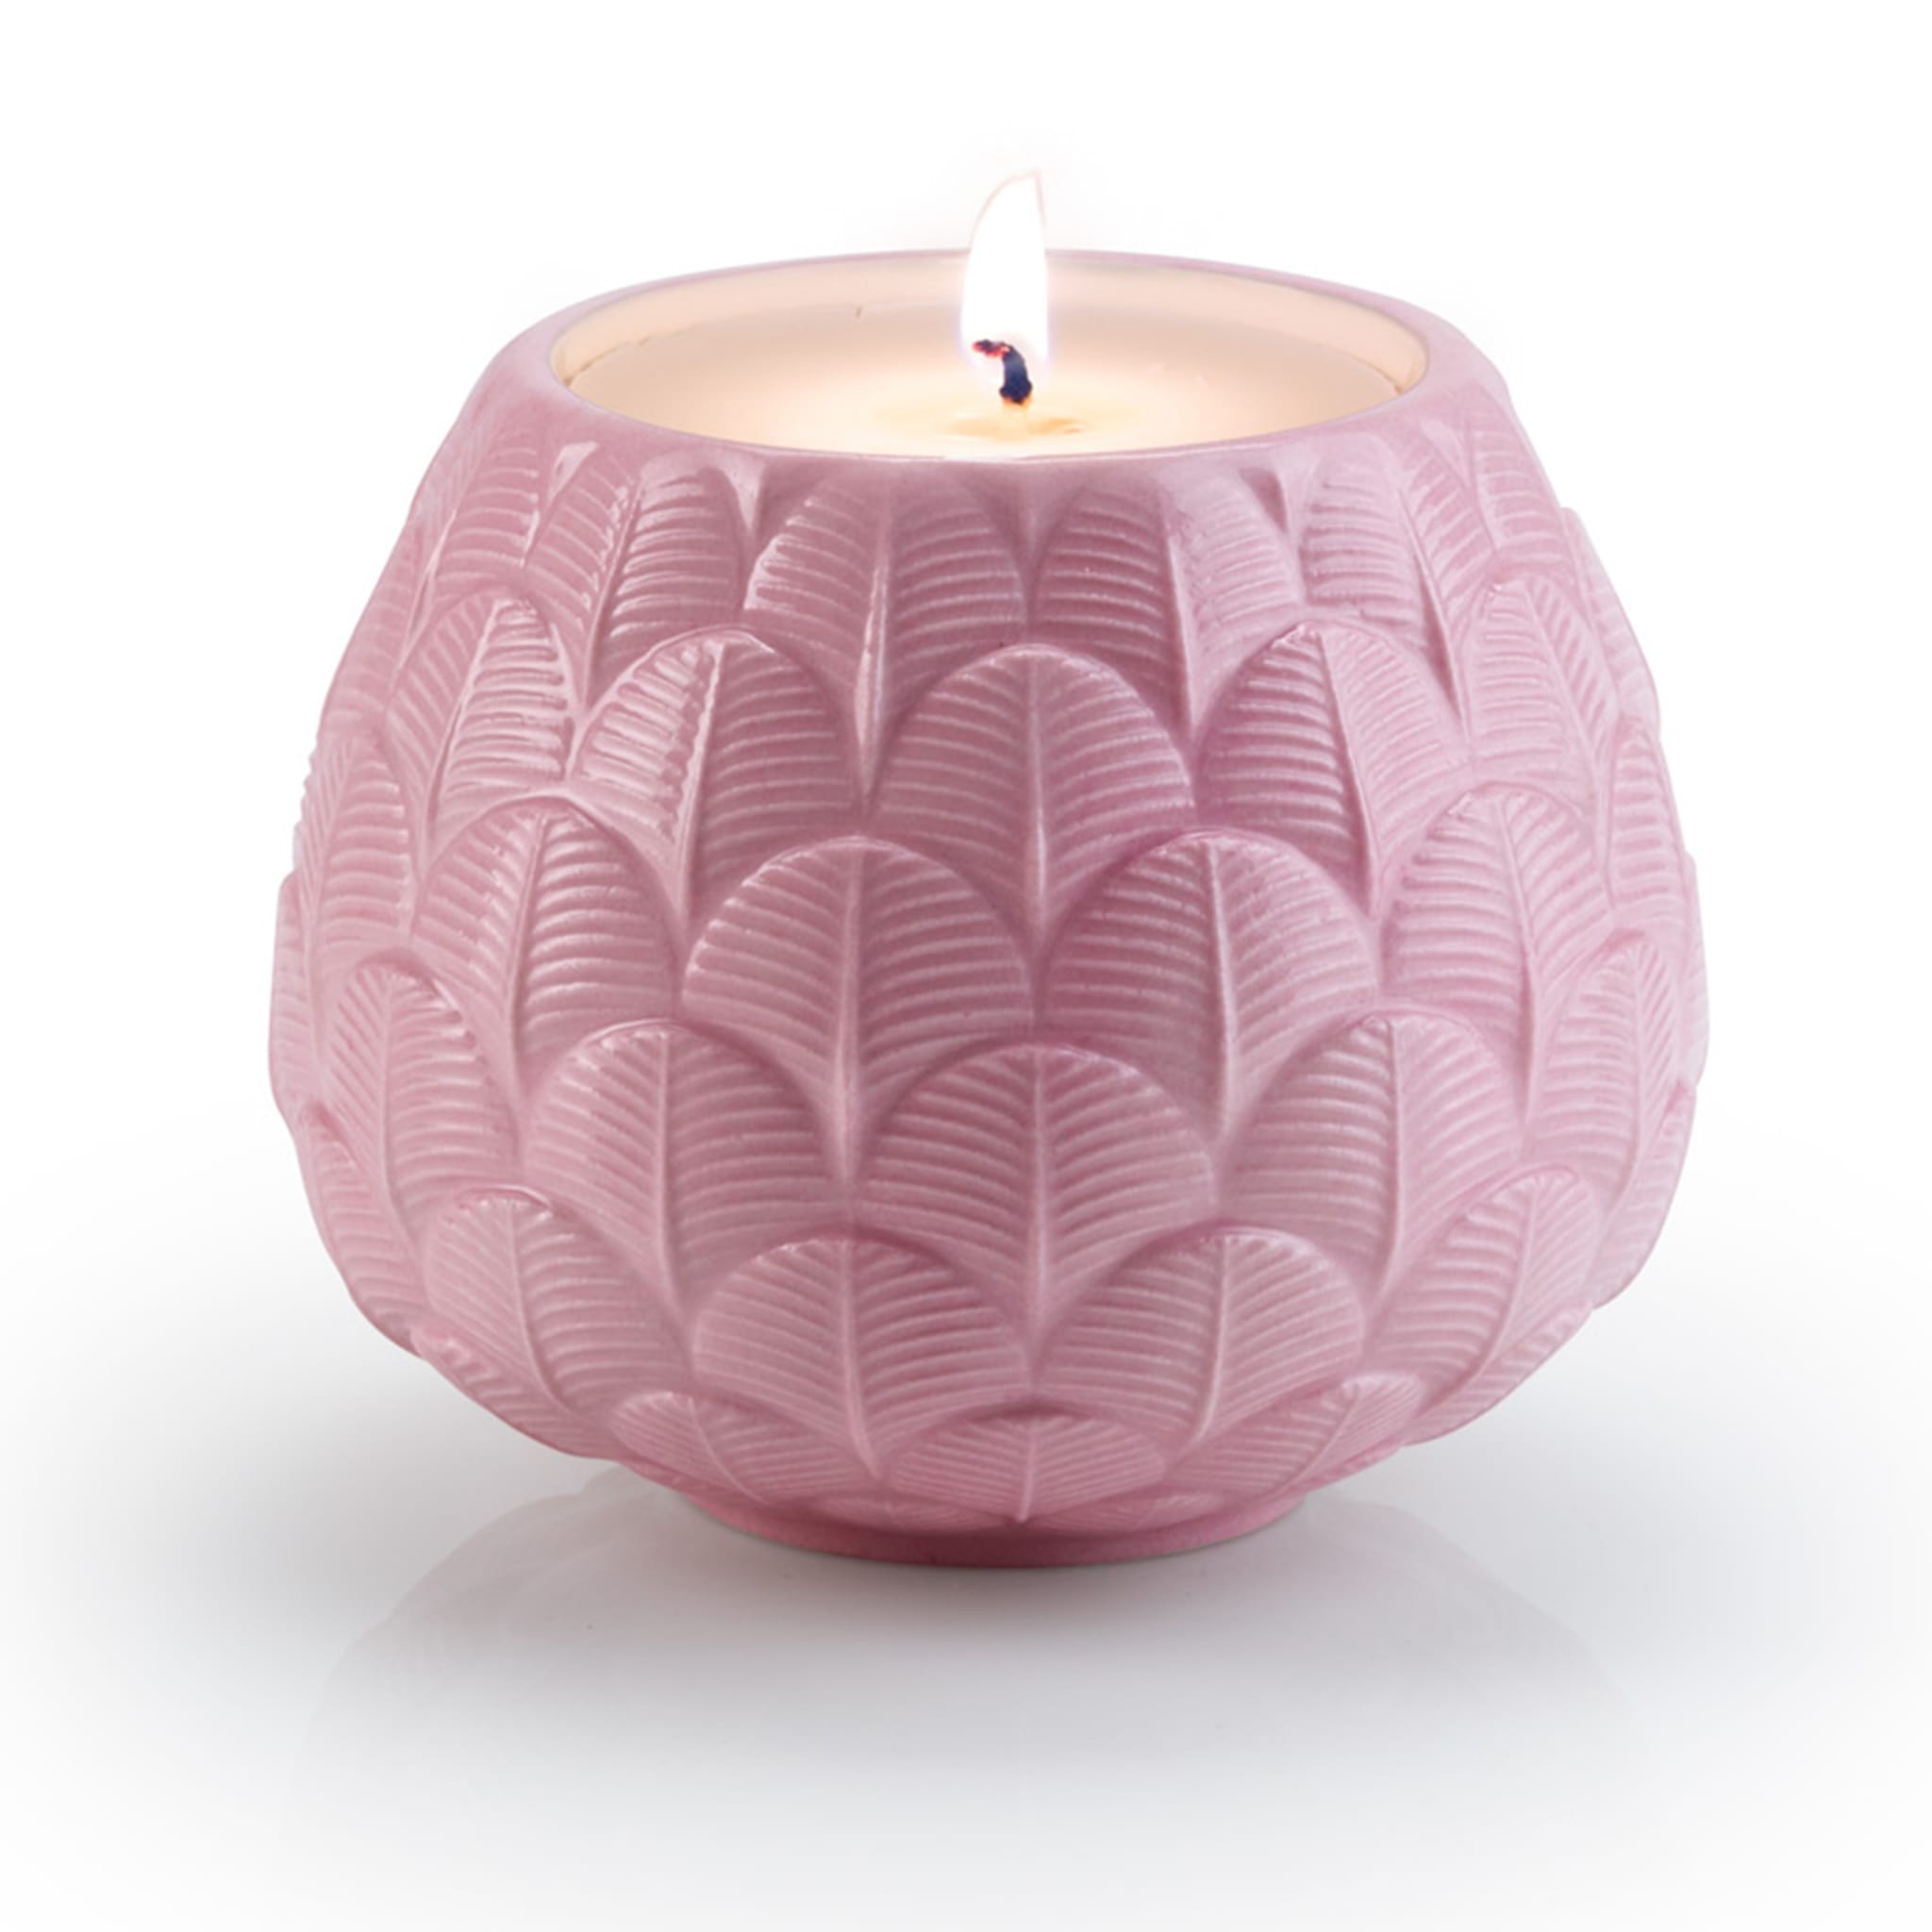 CHARLOTTE PEACOCK CANDLE COVER - RED Villari Home Couture